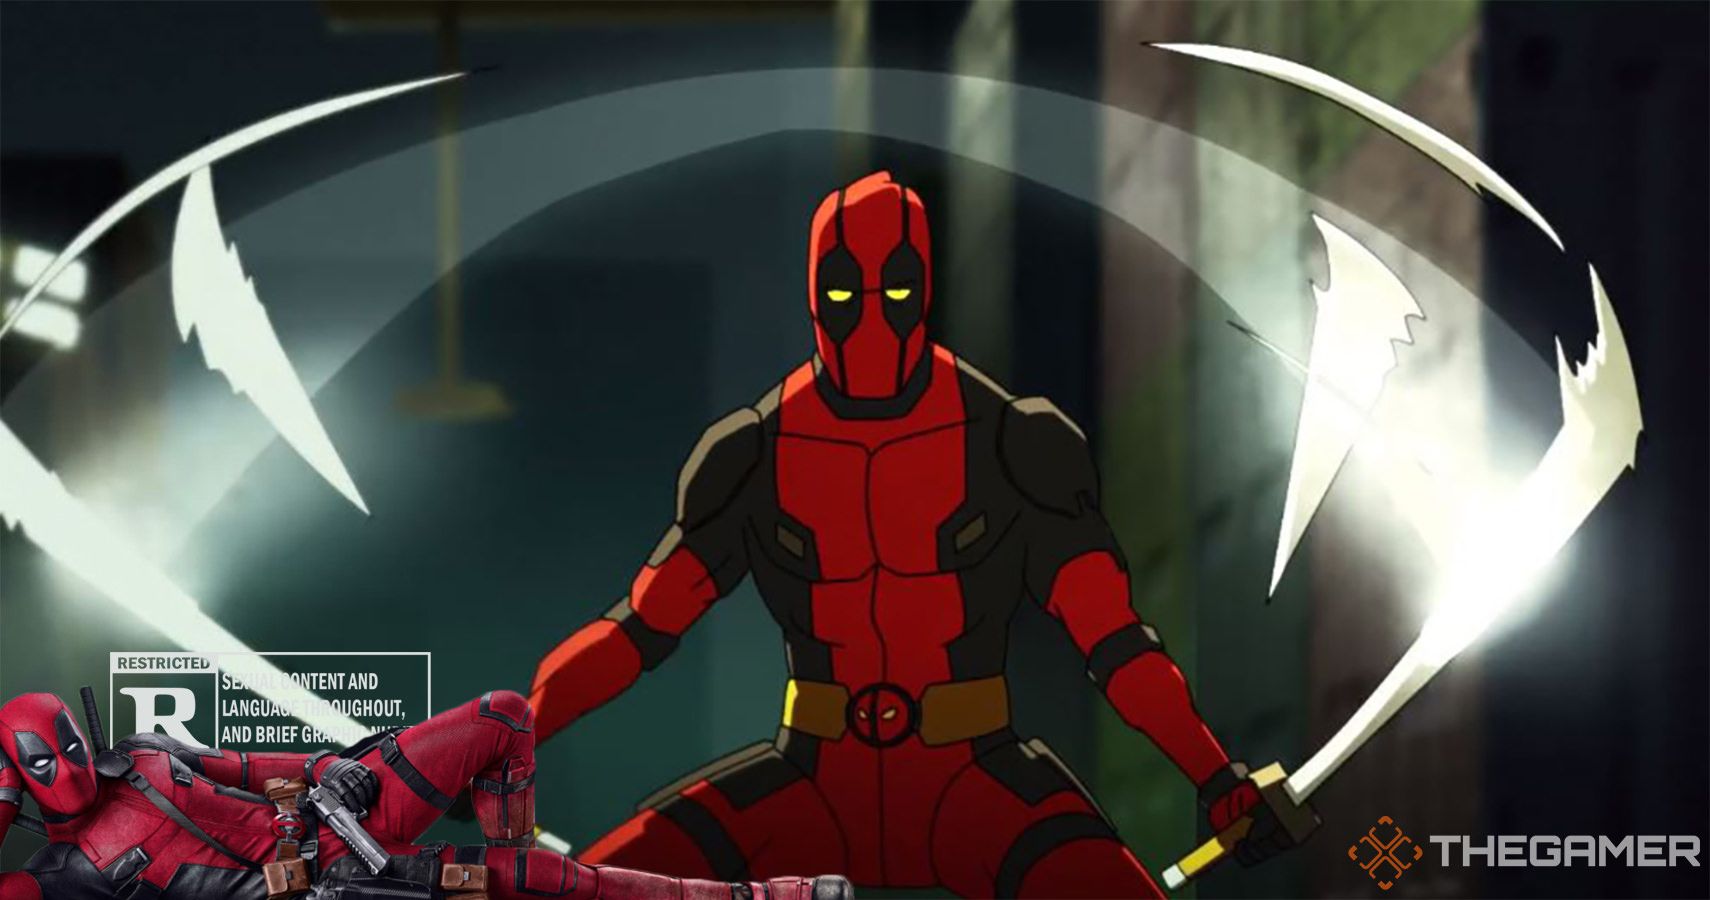 Ryan Reynolds Attached To An R-Rated Deadpool Animated Series